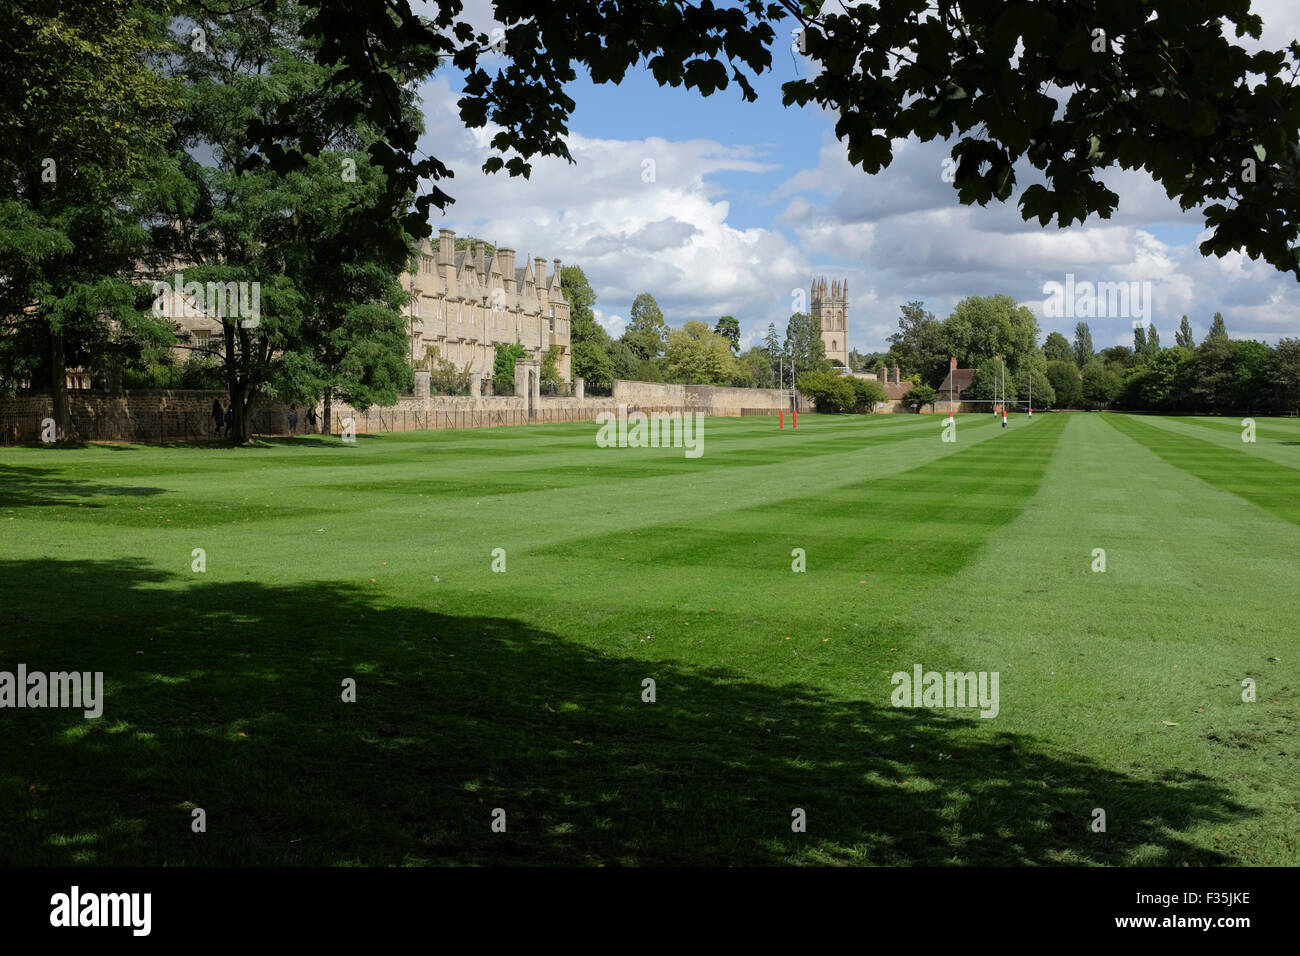 The Magdalen Tower and Merton College from Merton Field, Oxford University, Oxford, England. Stock Photo